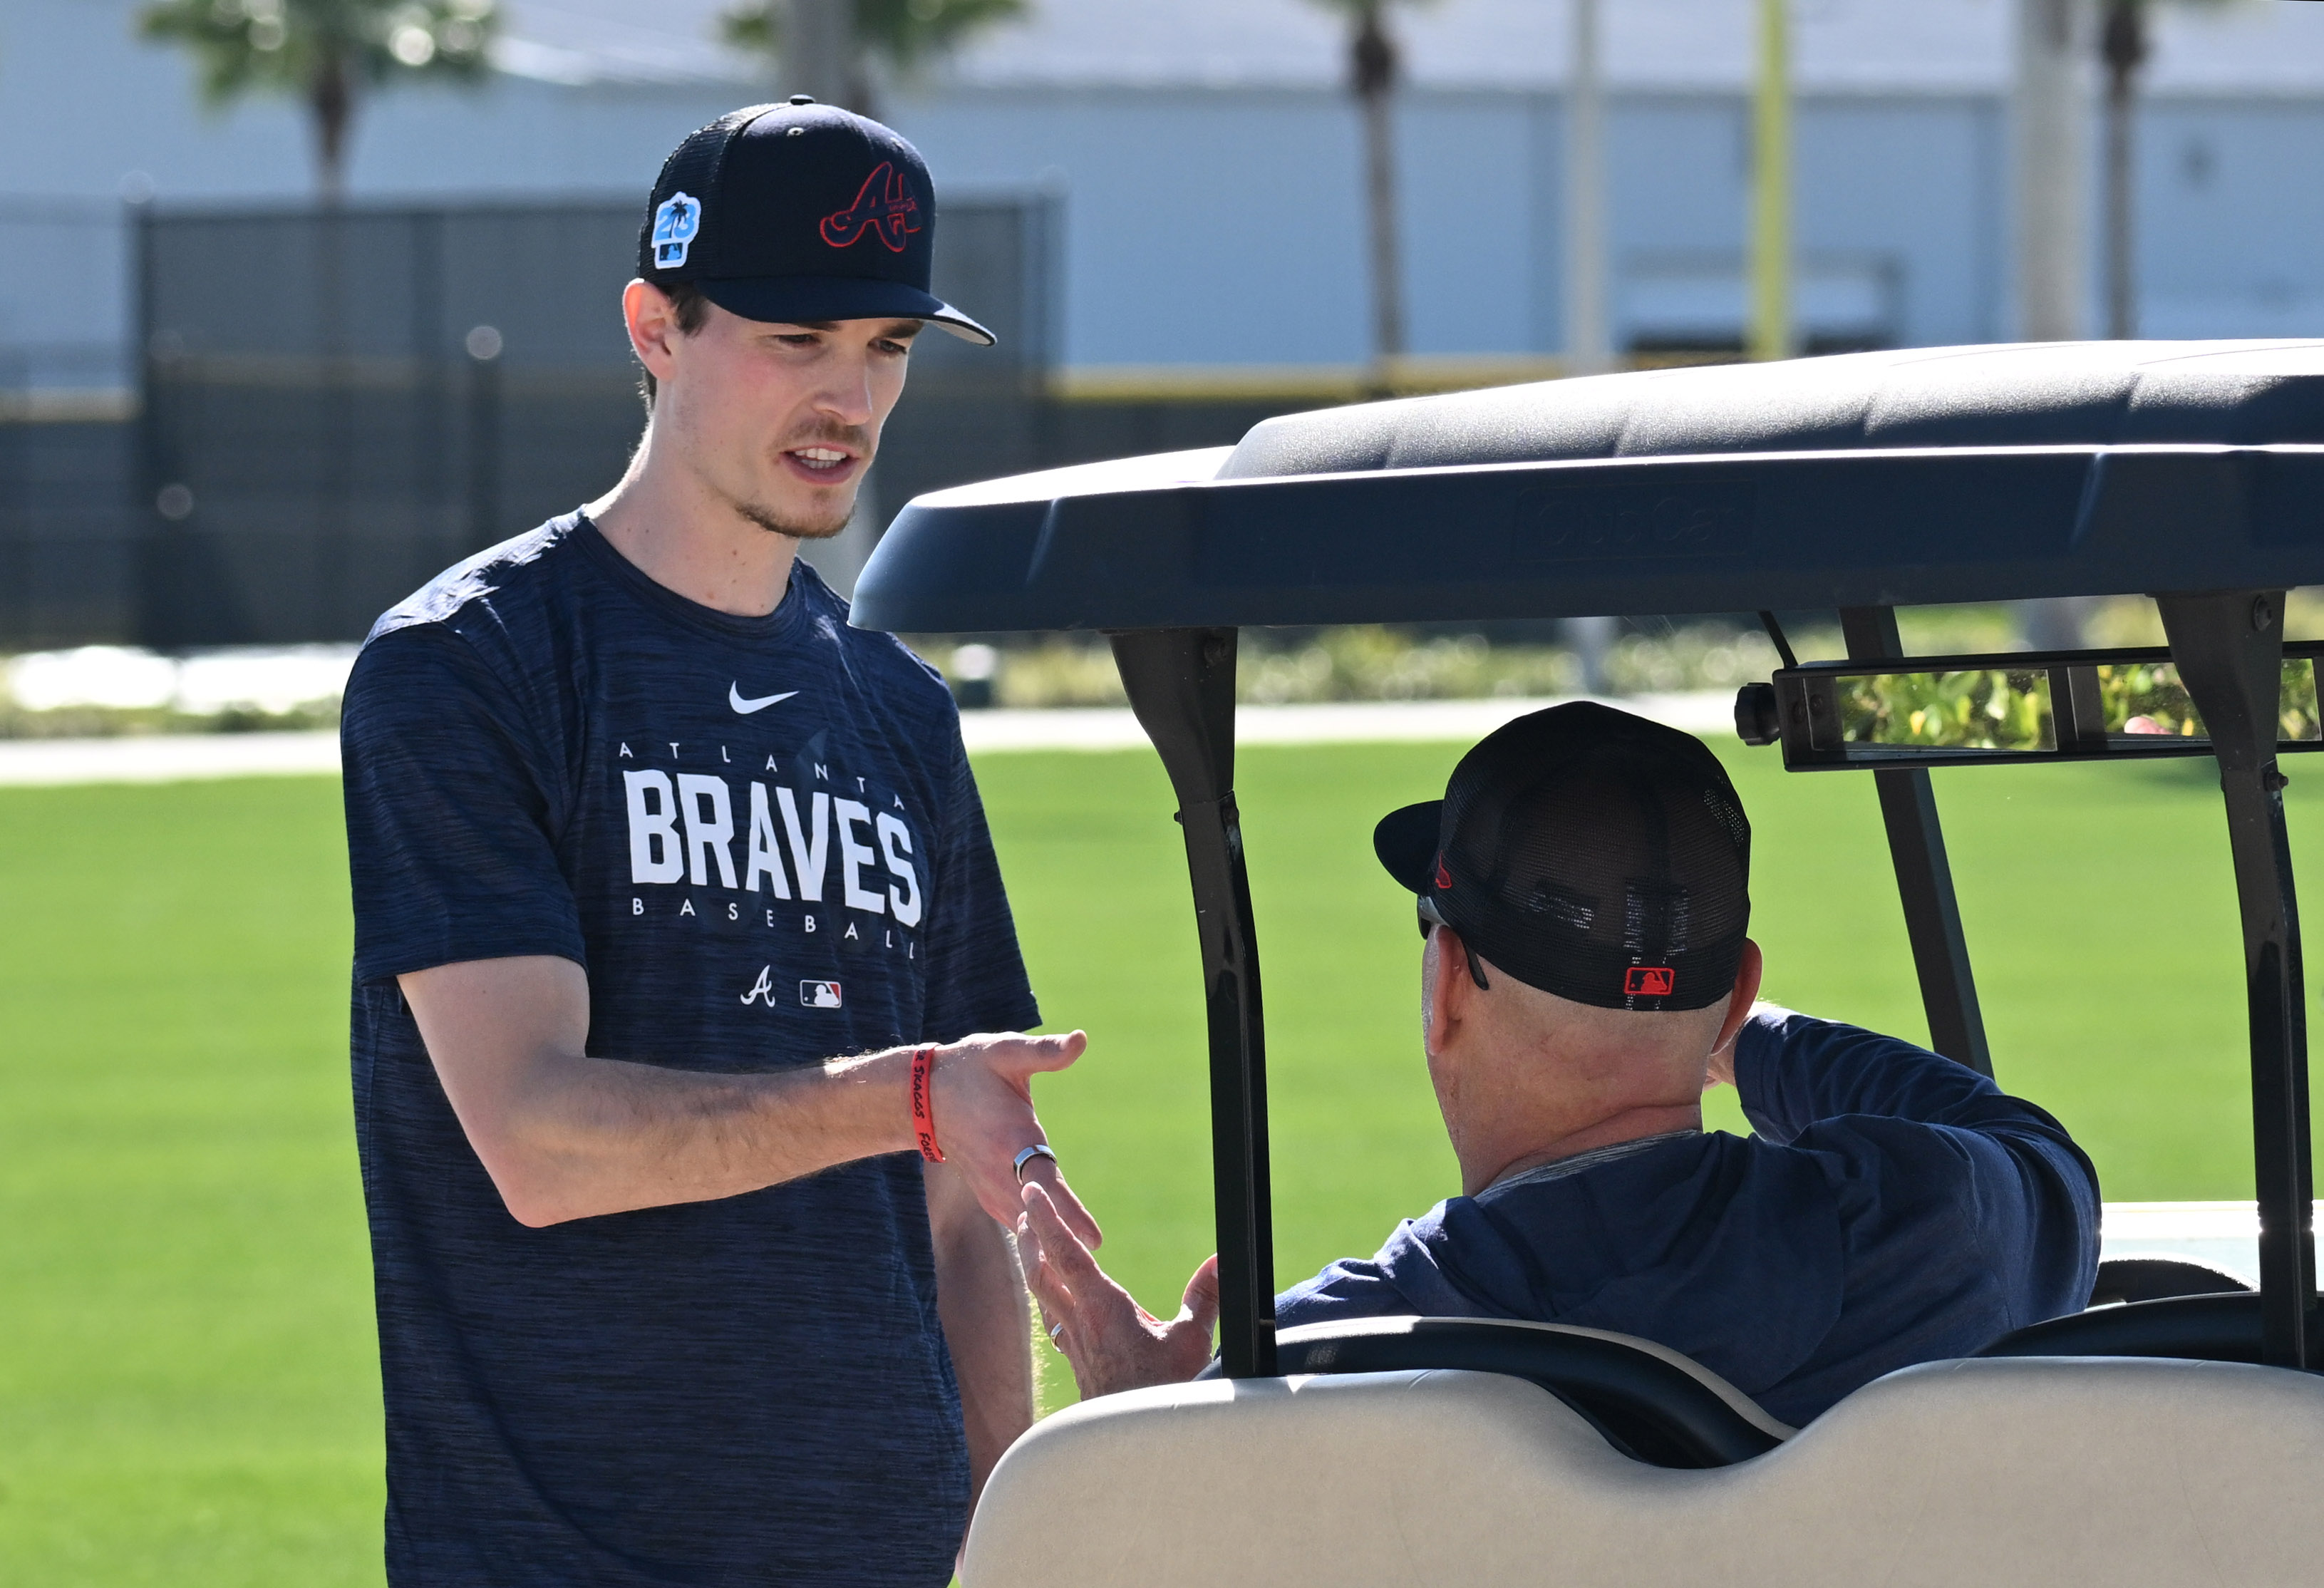 Sean Murphy a star with Braves, who are getting elite offense from